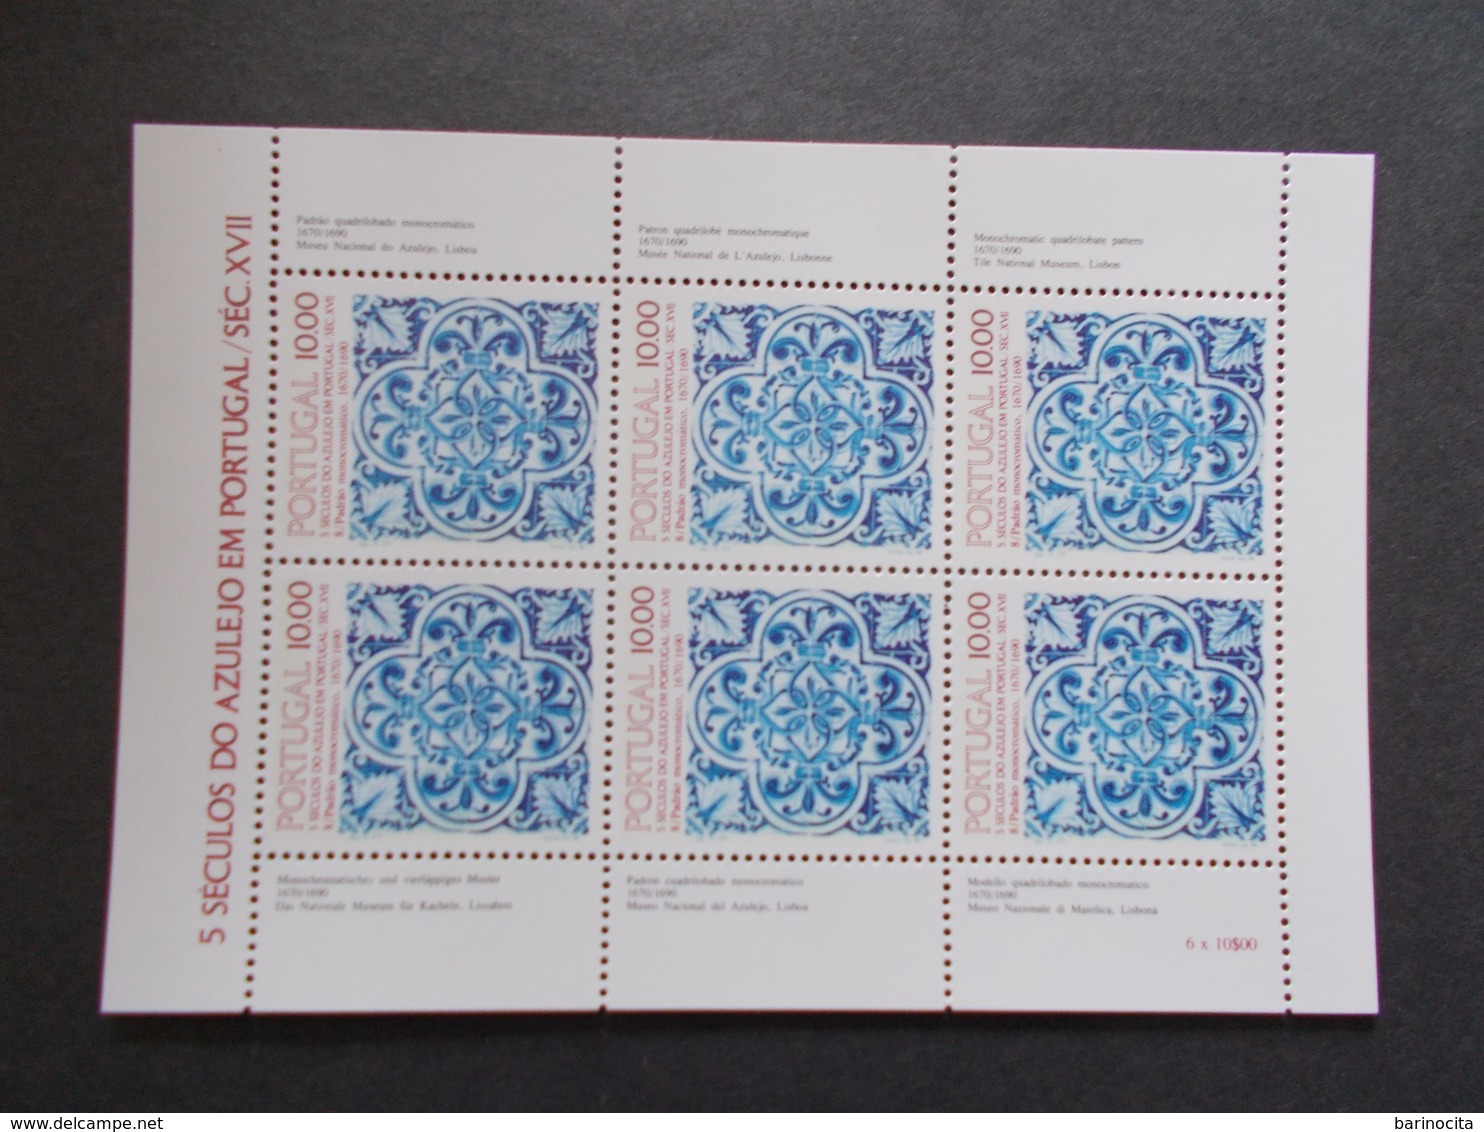 PORTUGAL   -  FEUILLES  Complete  Di Timbres   N° 1561 A   Année 1982   Neuf XX   ( Voir Photo )  52 - Full Sheets & Multiples